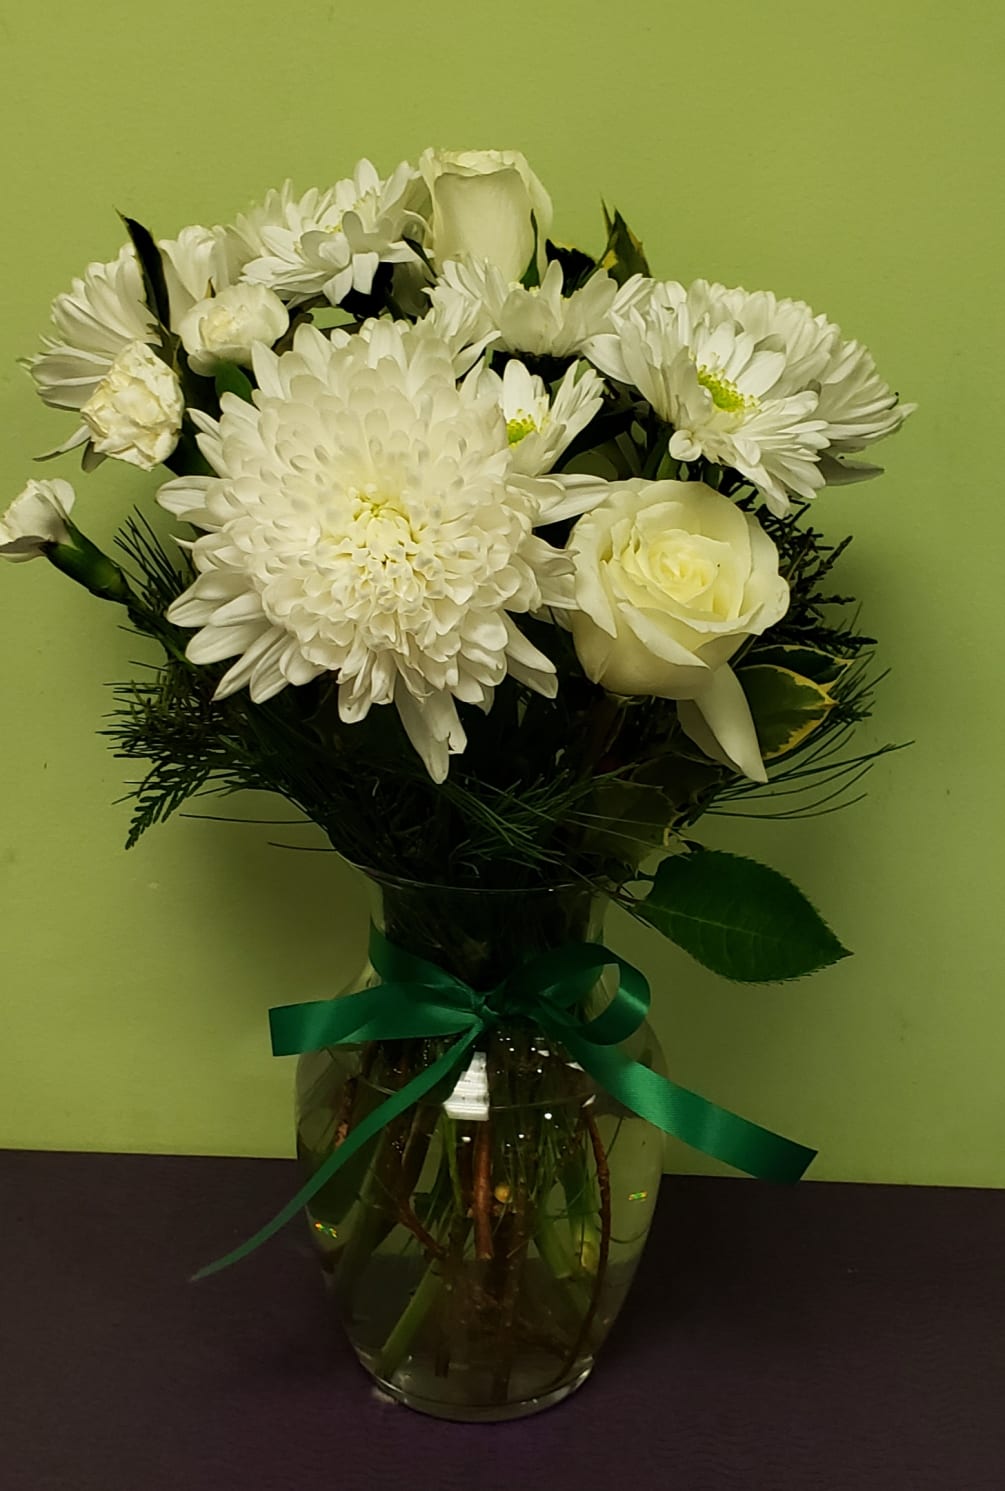 Send a chilly arrangement full of fresh snow white blooms to your